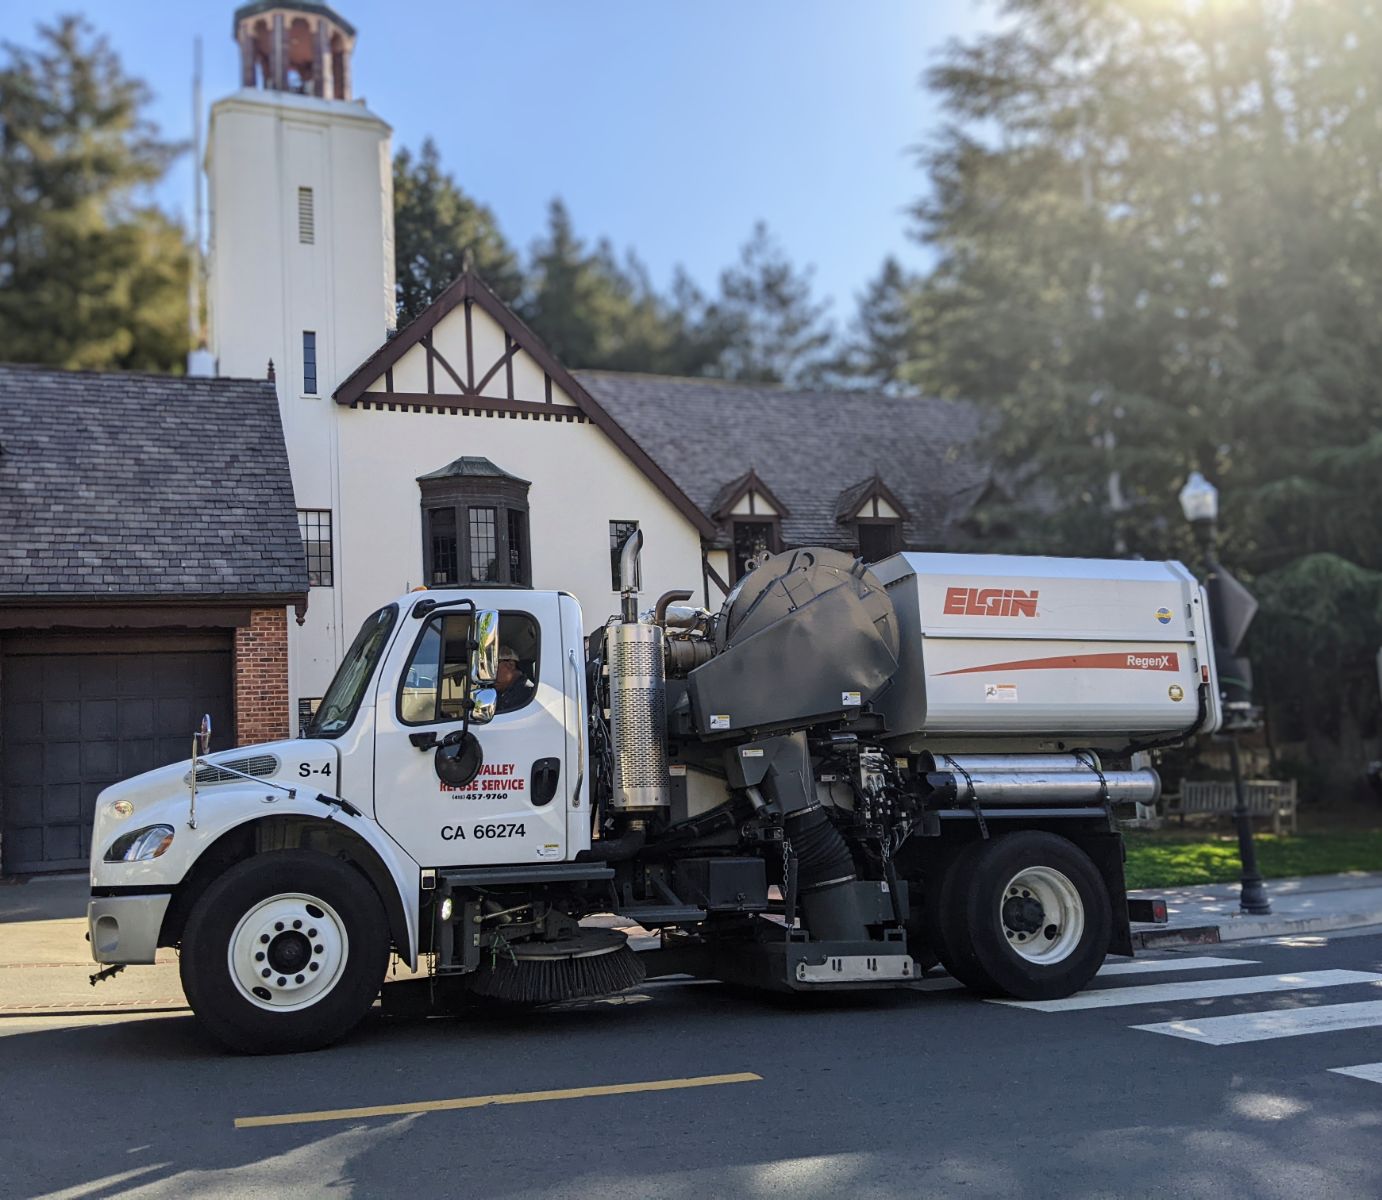 MVRS Street Sweeping Truck in front of Mill Valley City Hall